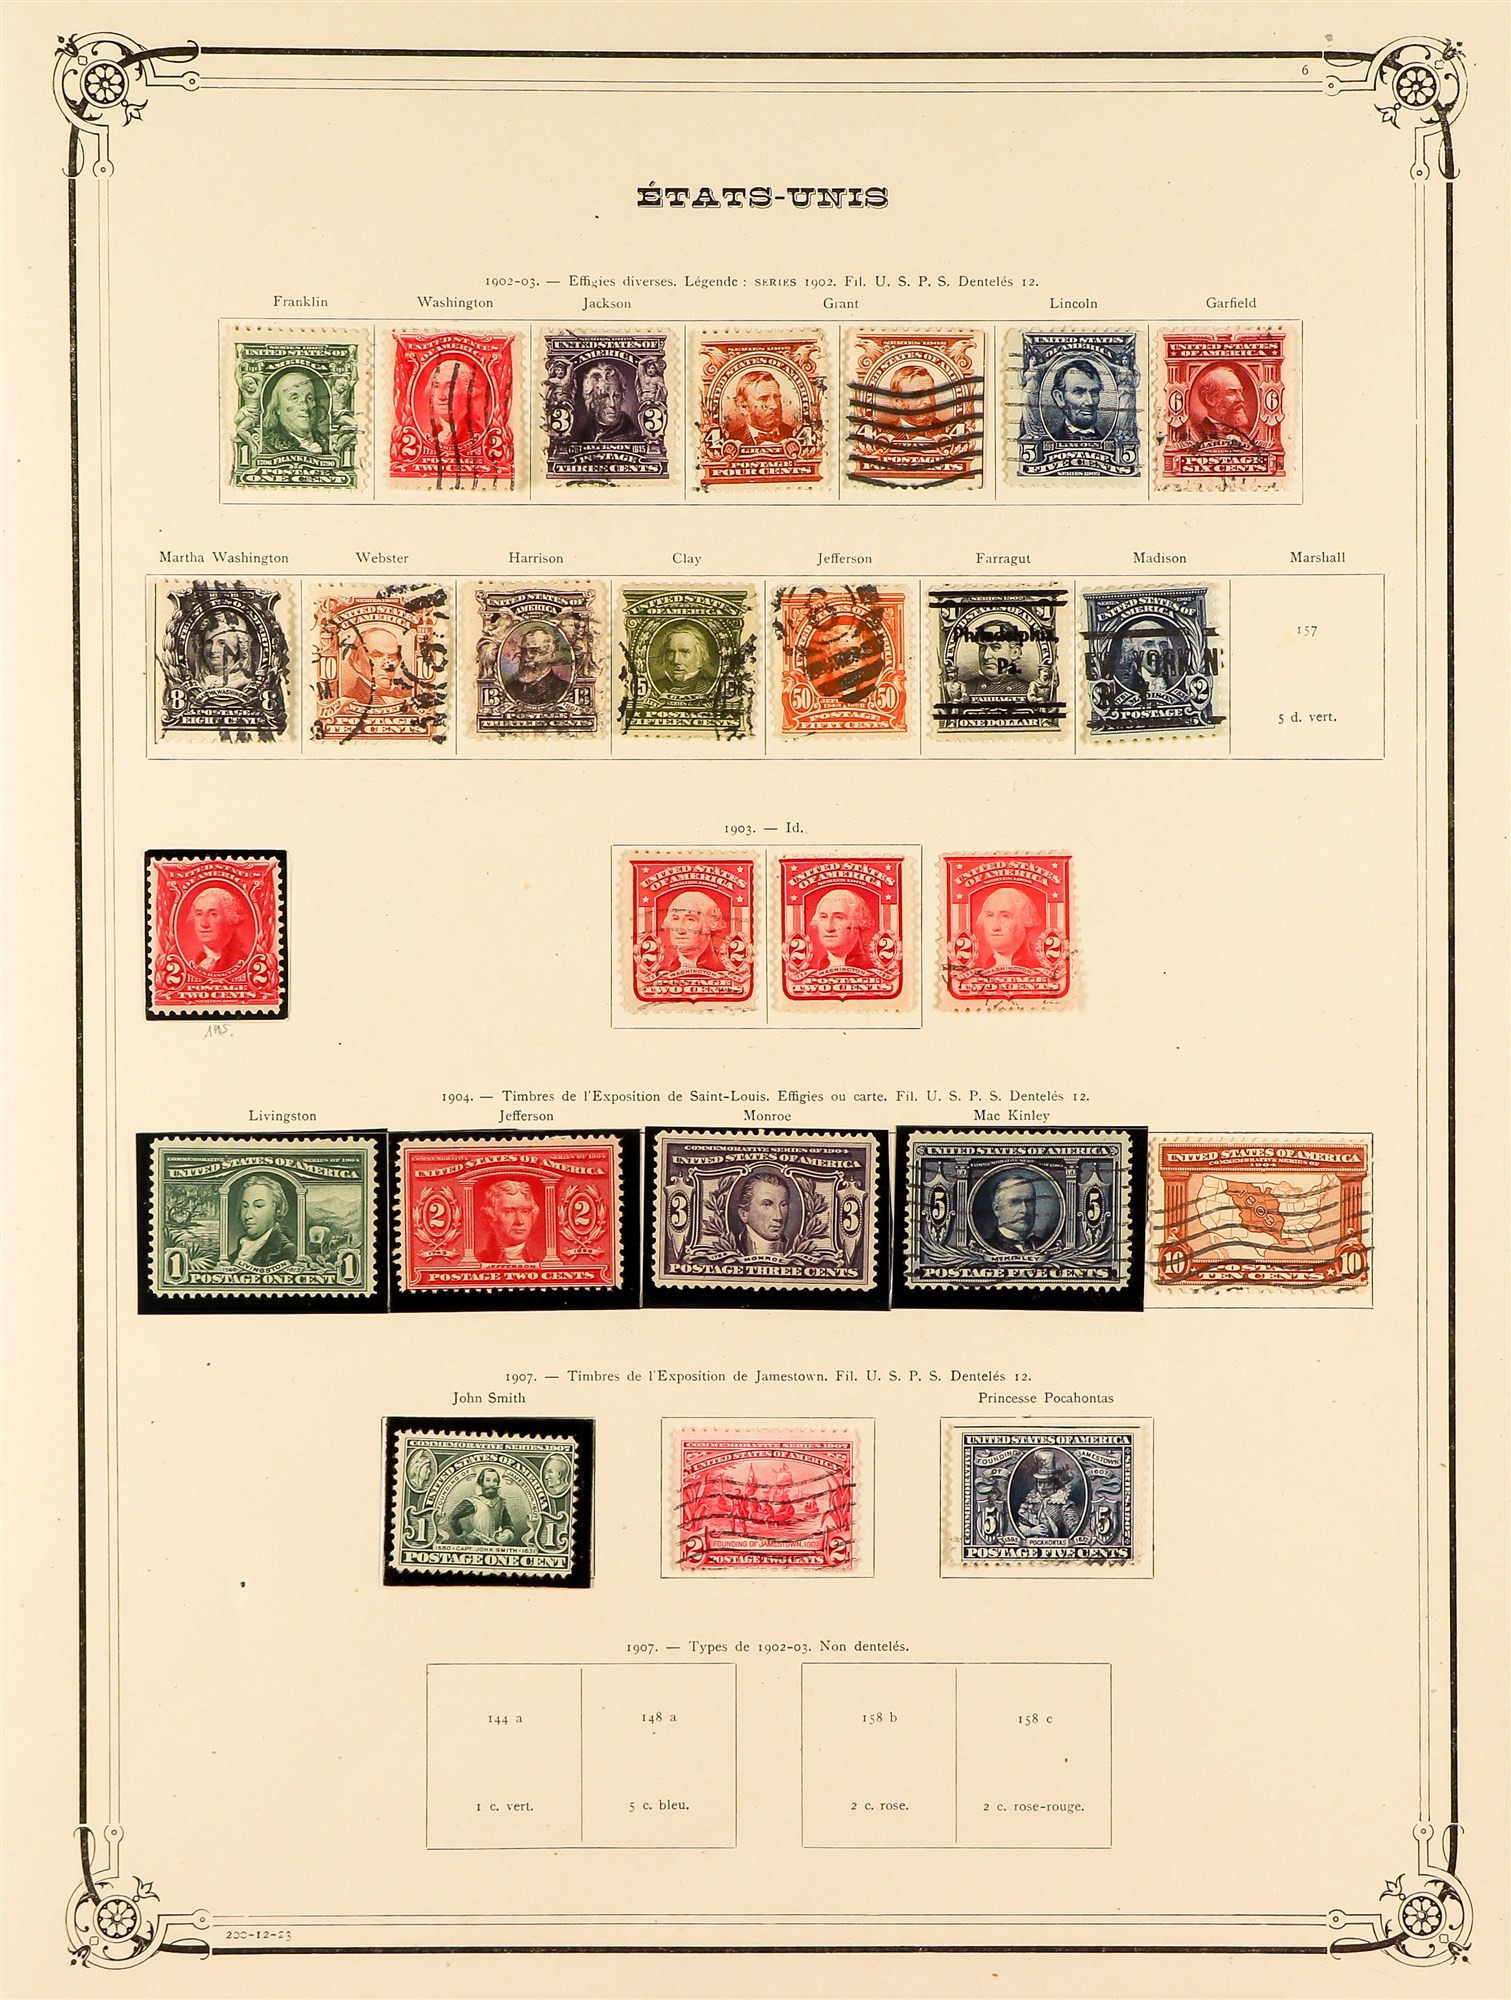 UNITED STATES 1902 - 1938 COLLECTION of mint and used stamps on old Yvert album pages, includes many